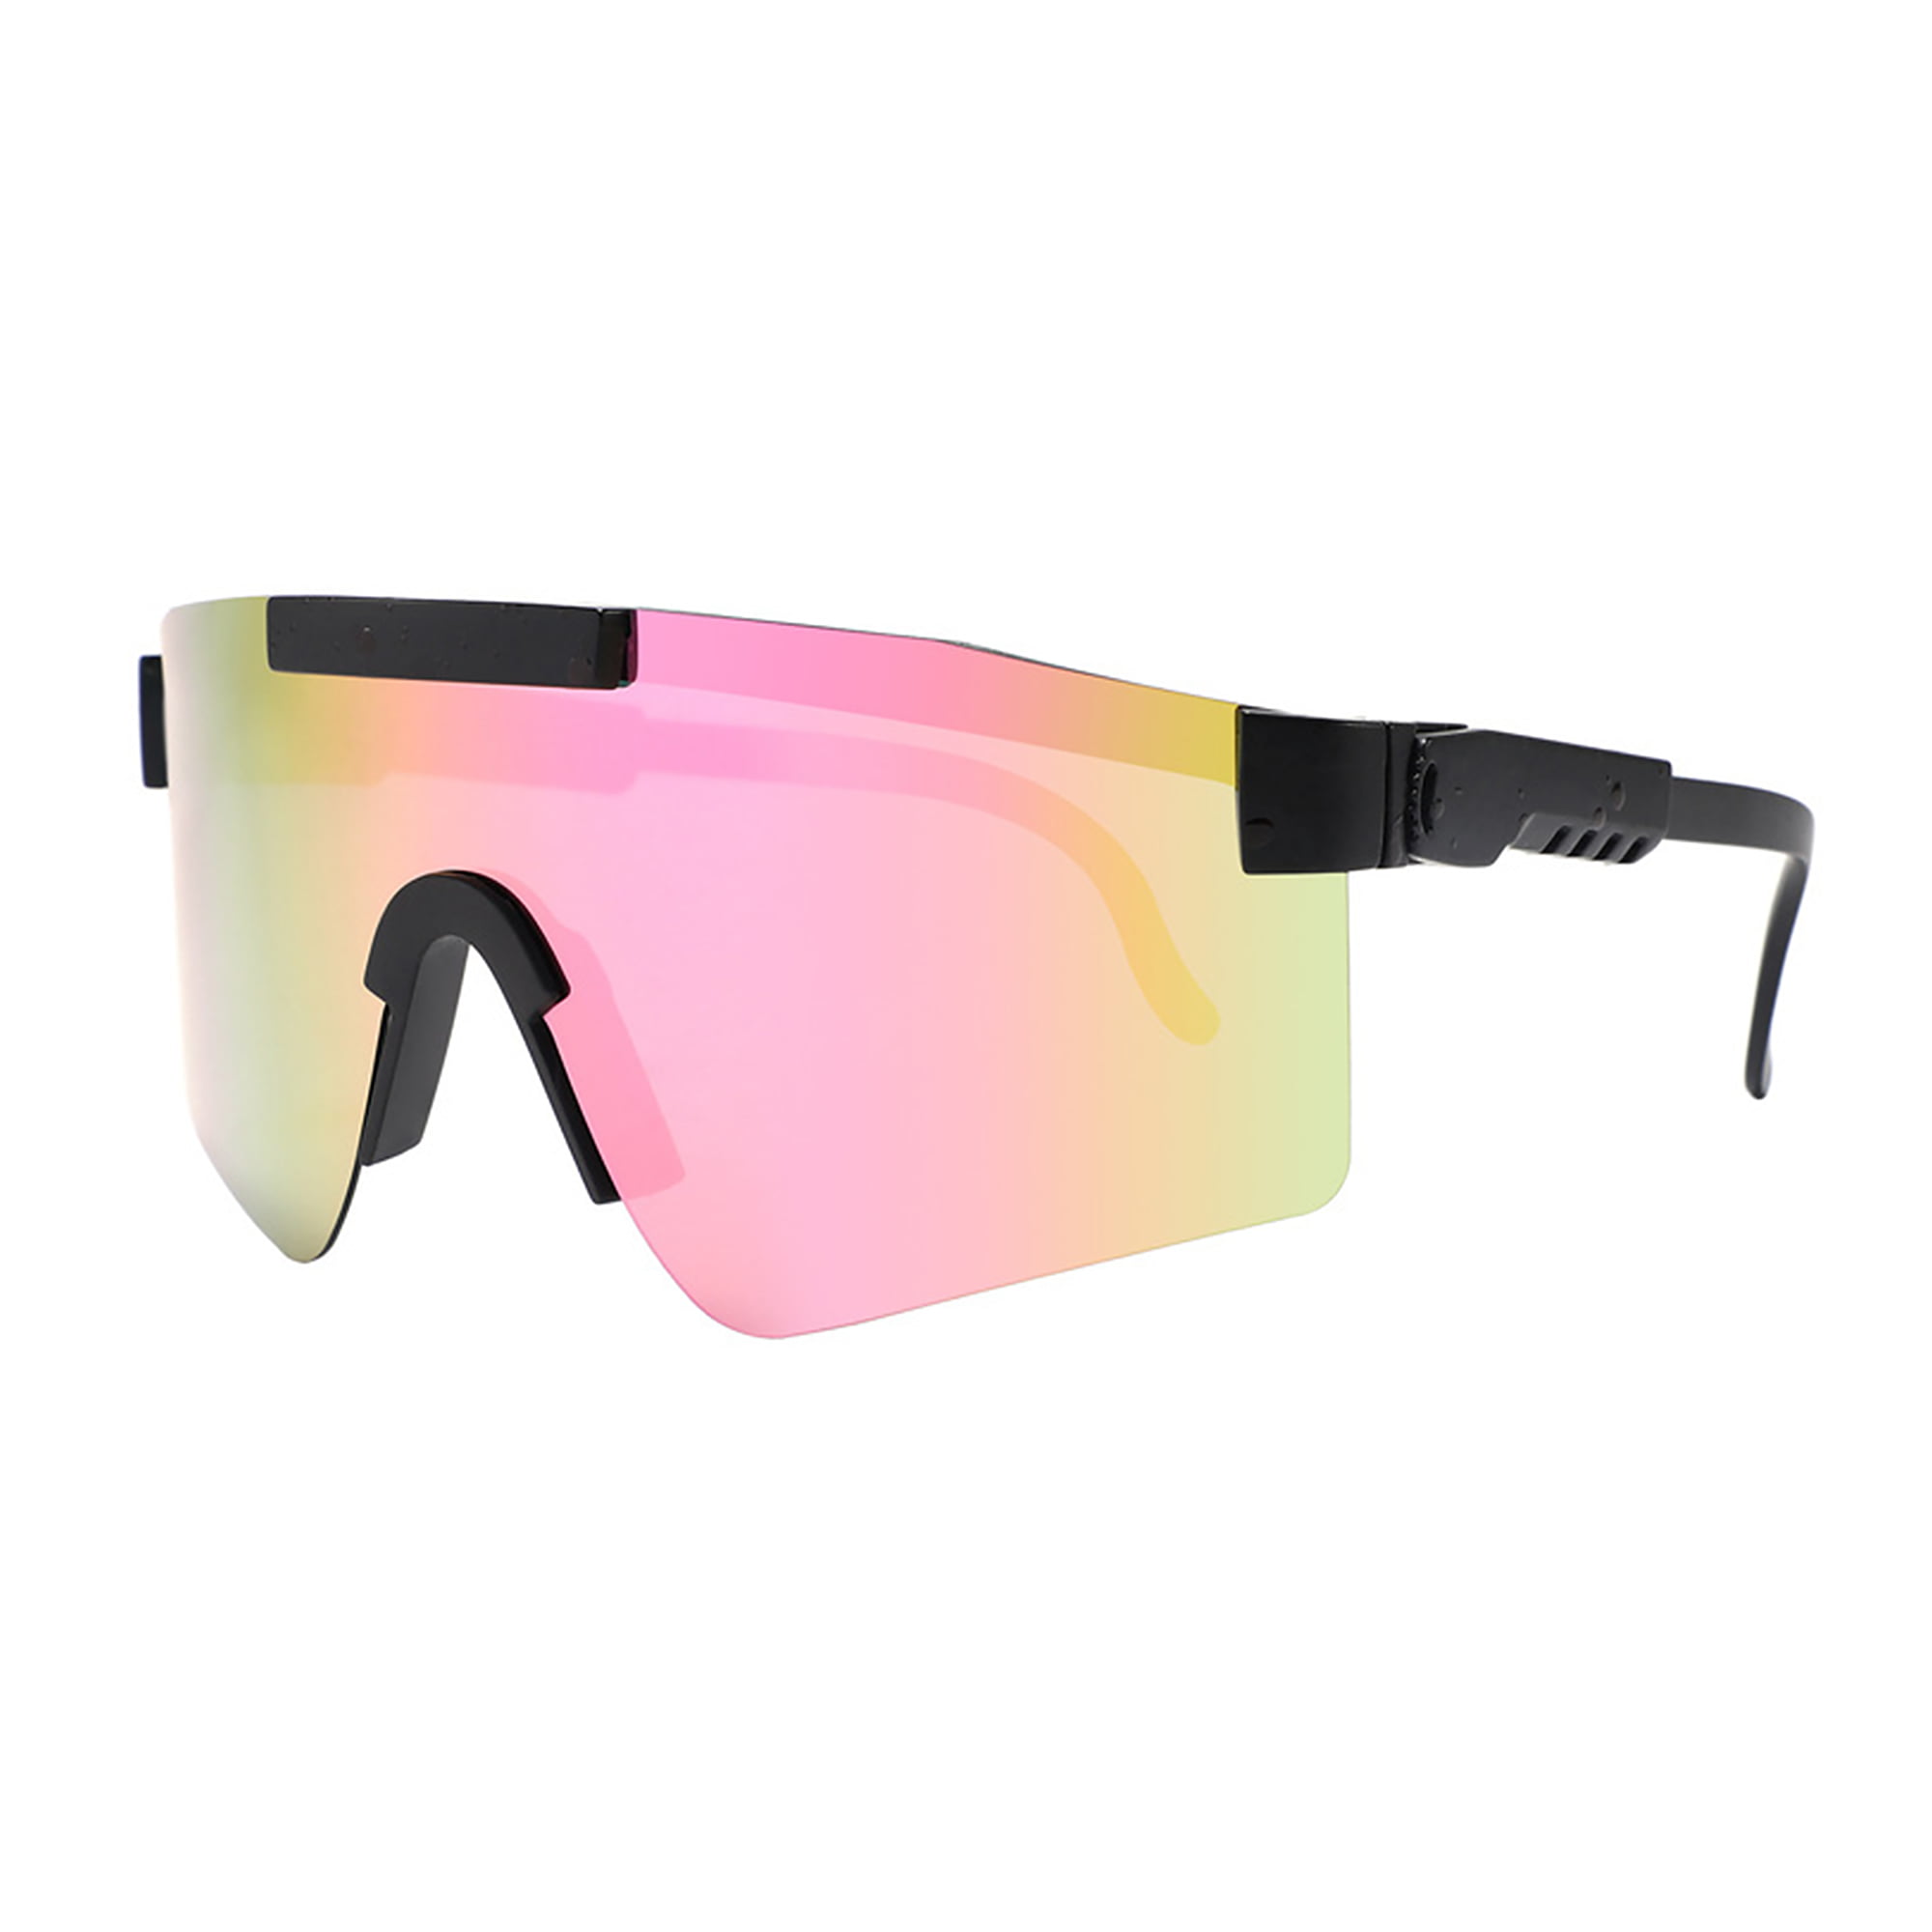 OULAIQI Polarized Sunglasses for Men and Women,Ideal for Driving Fishing Cycling and Running,UV Protection 